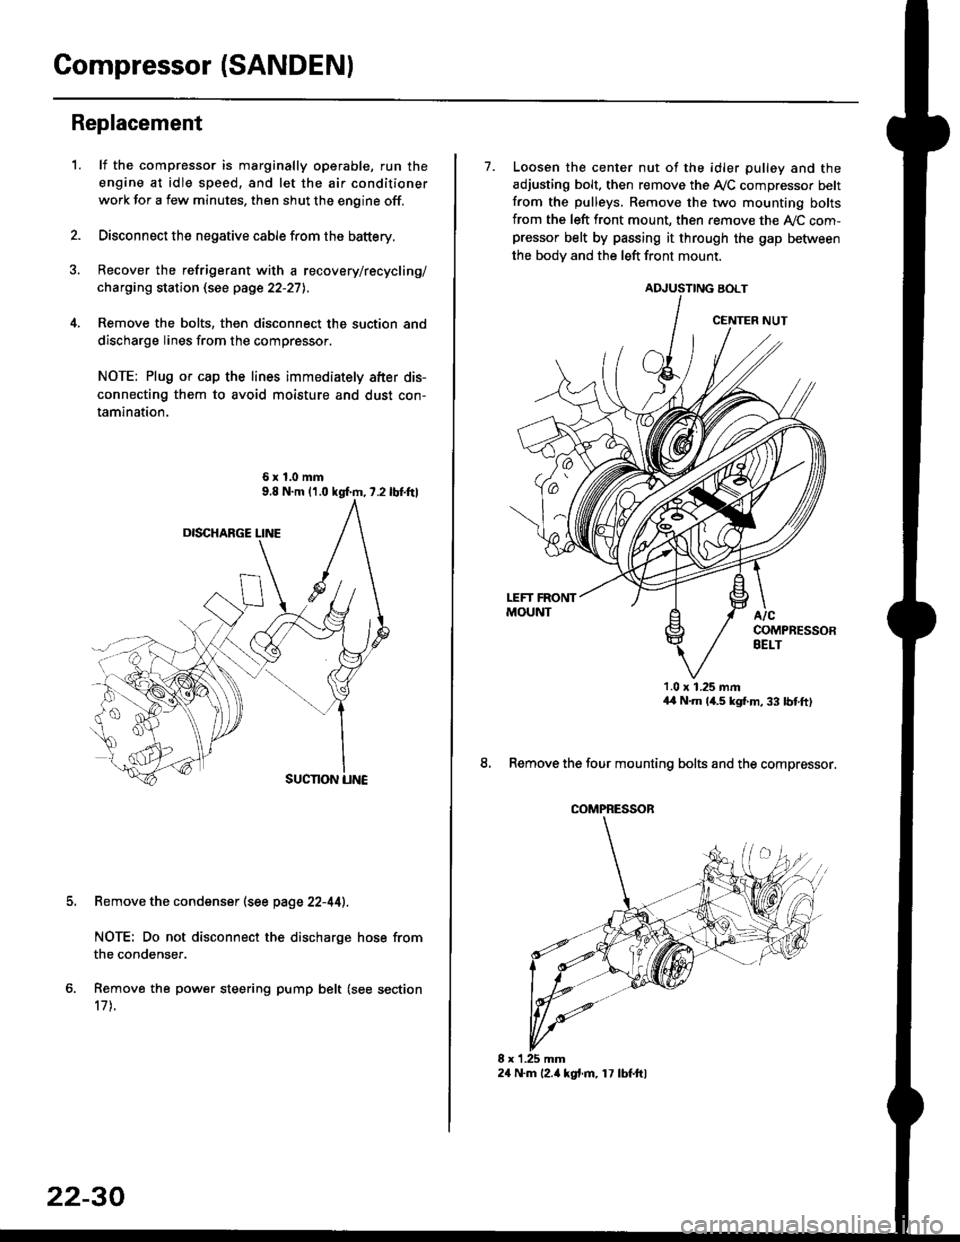 HONDA CIVIC 1998 6.G Service Manual Compressor (SANDENI
Replacement
1.lf the compressor is marginally operable, run the
engine at idle speed, and let the air conditioner
work for a few minutes. then shut the engine off.
Disconnect the n